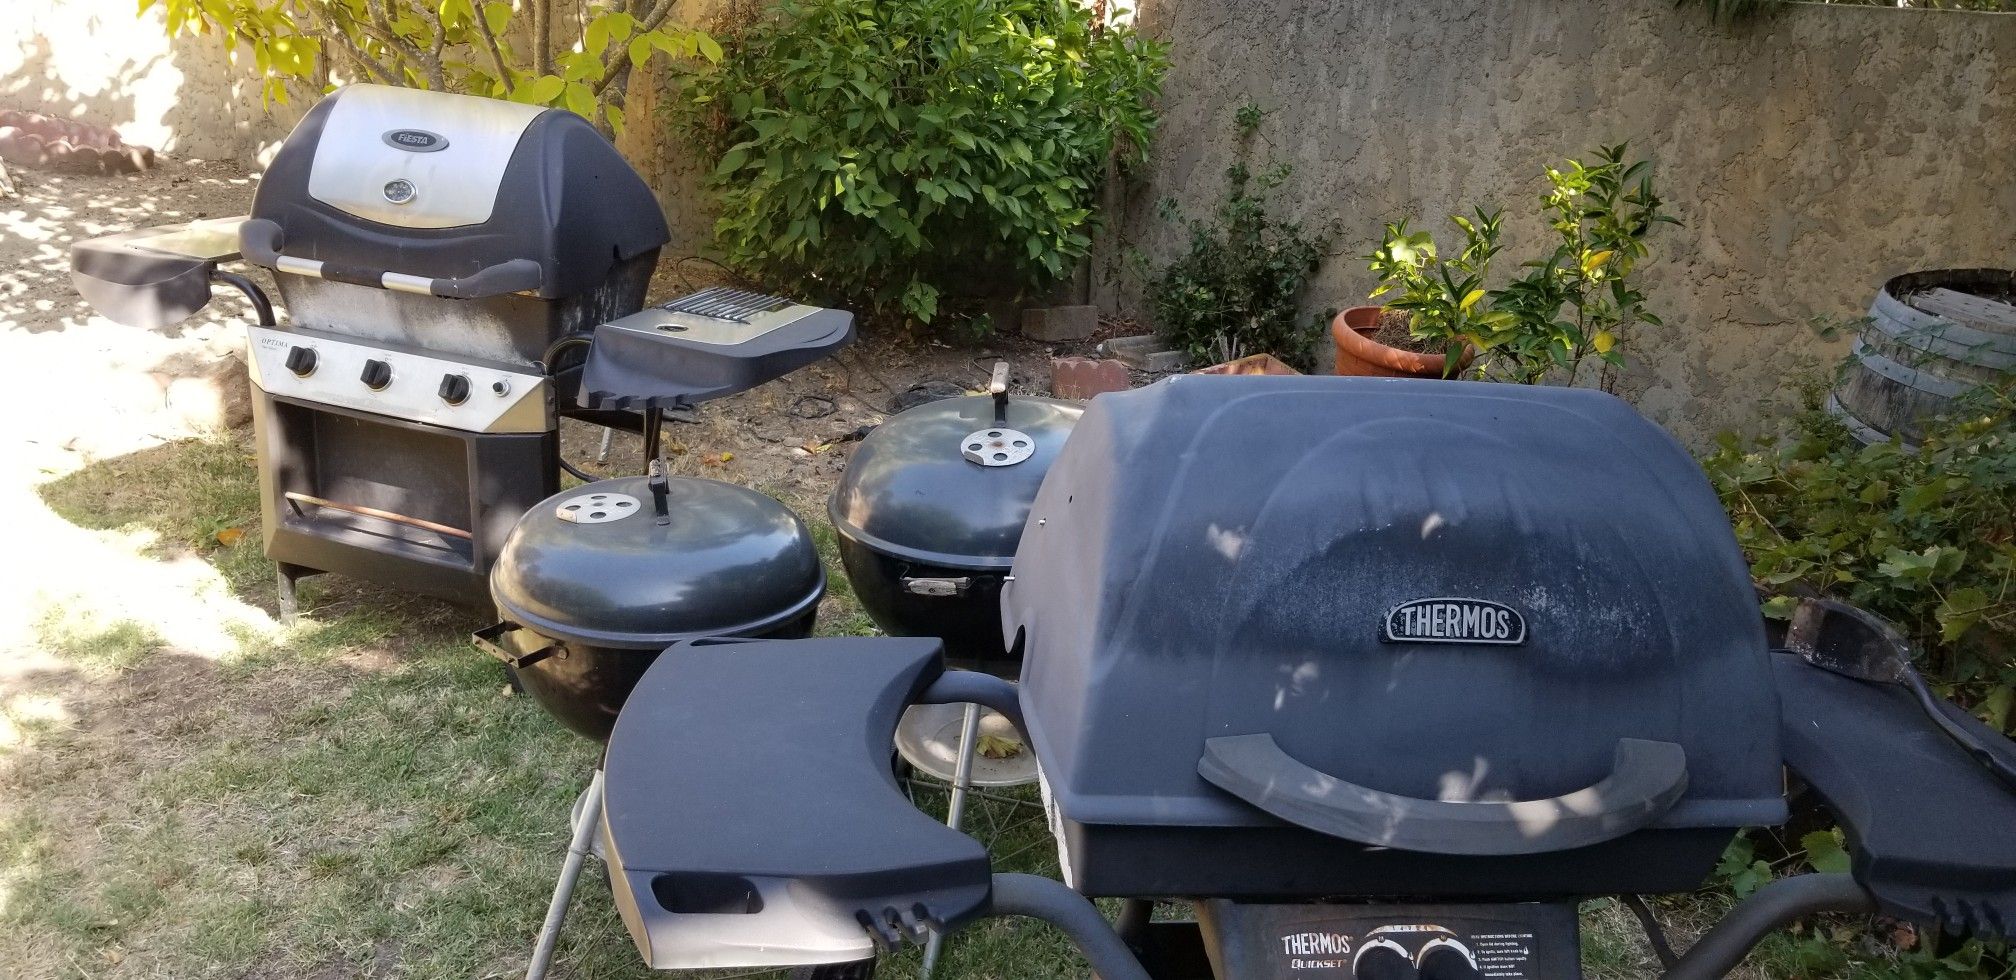 Take your pick $20 each barbecue pits